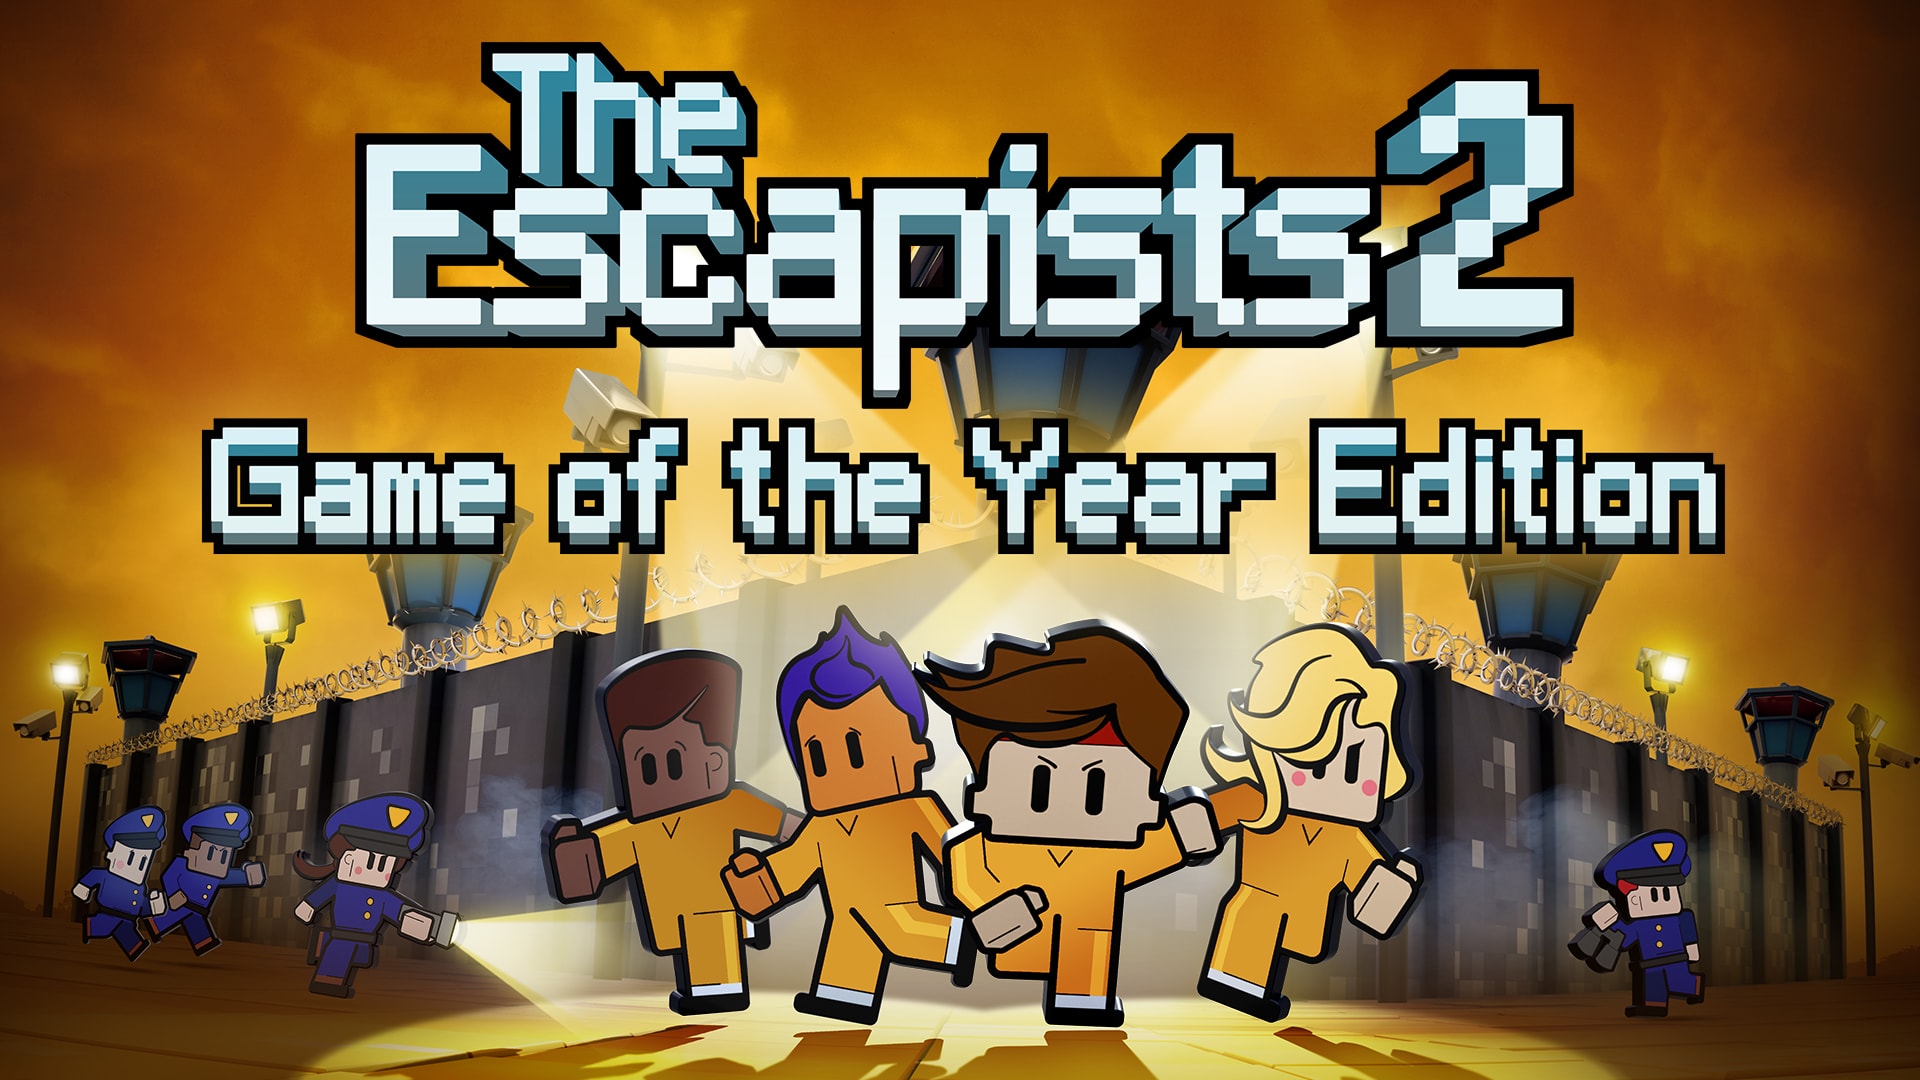 The Escapists 2 - Game of the Year Edition 1